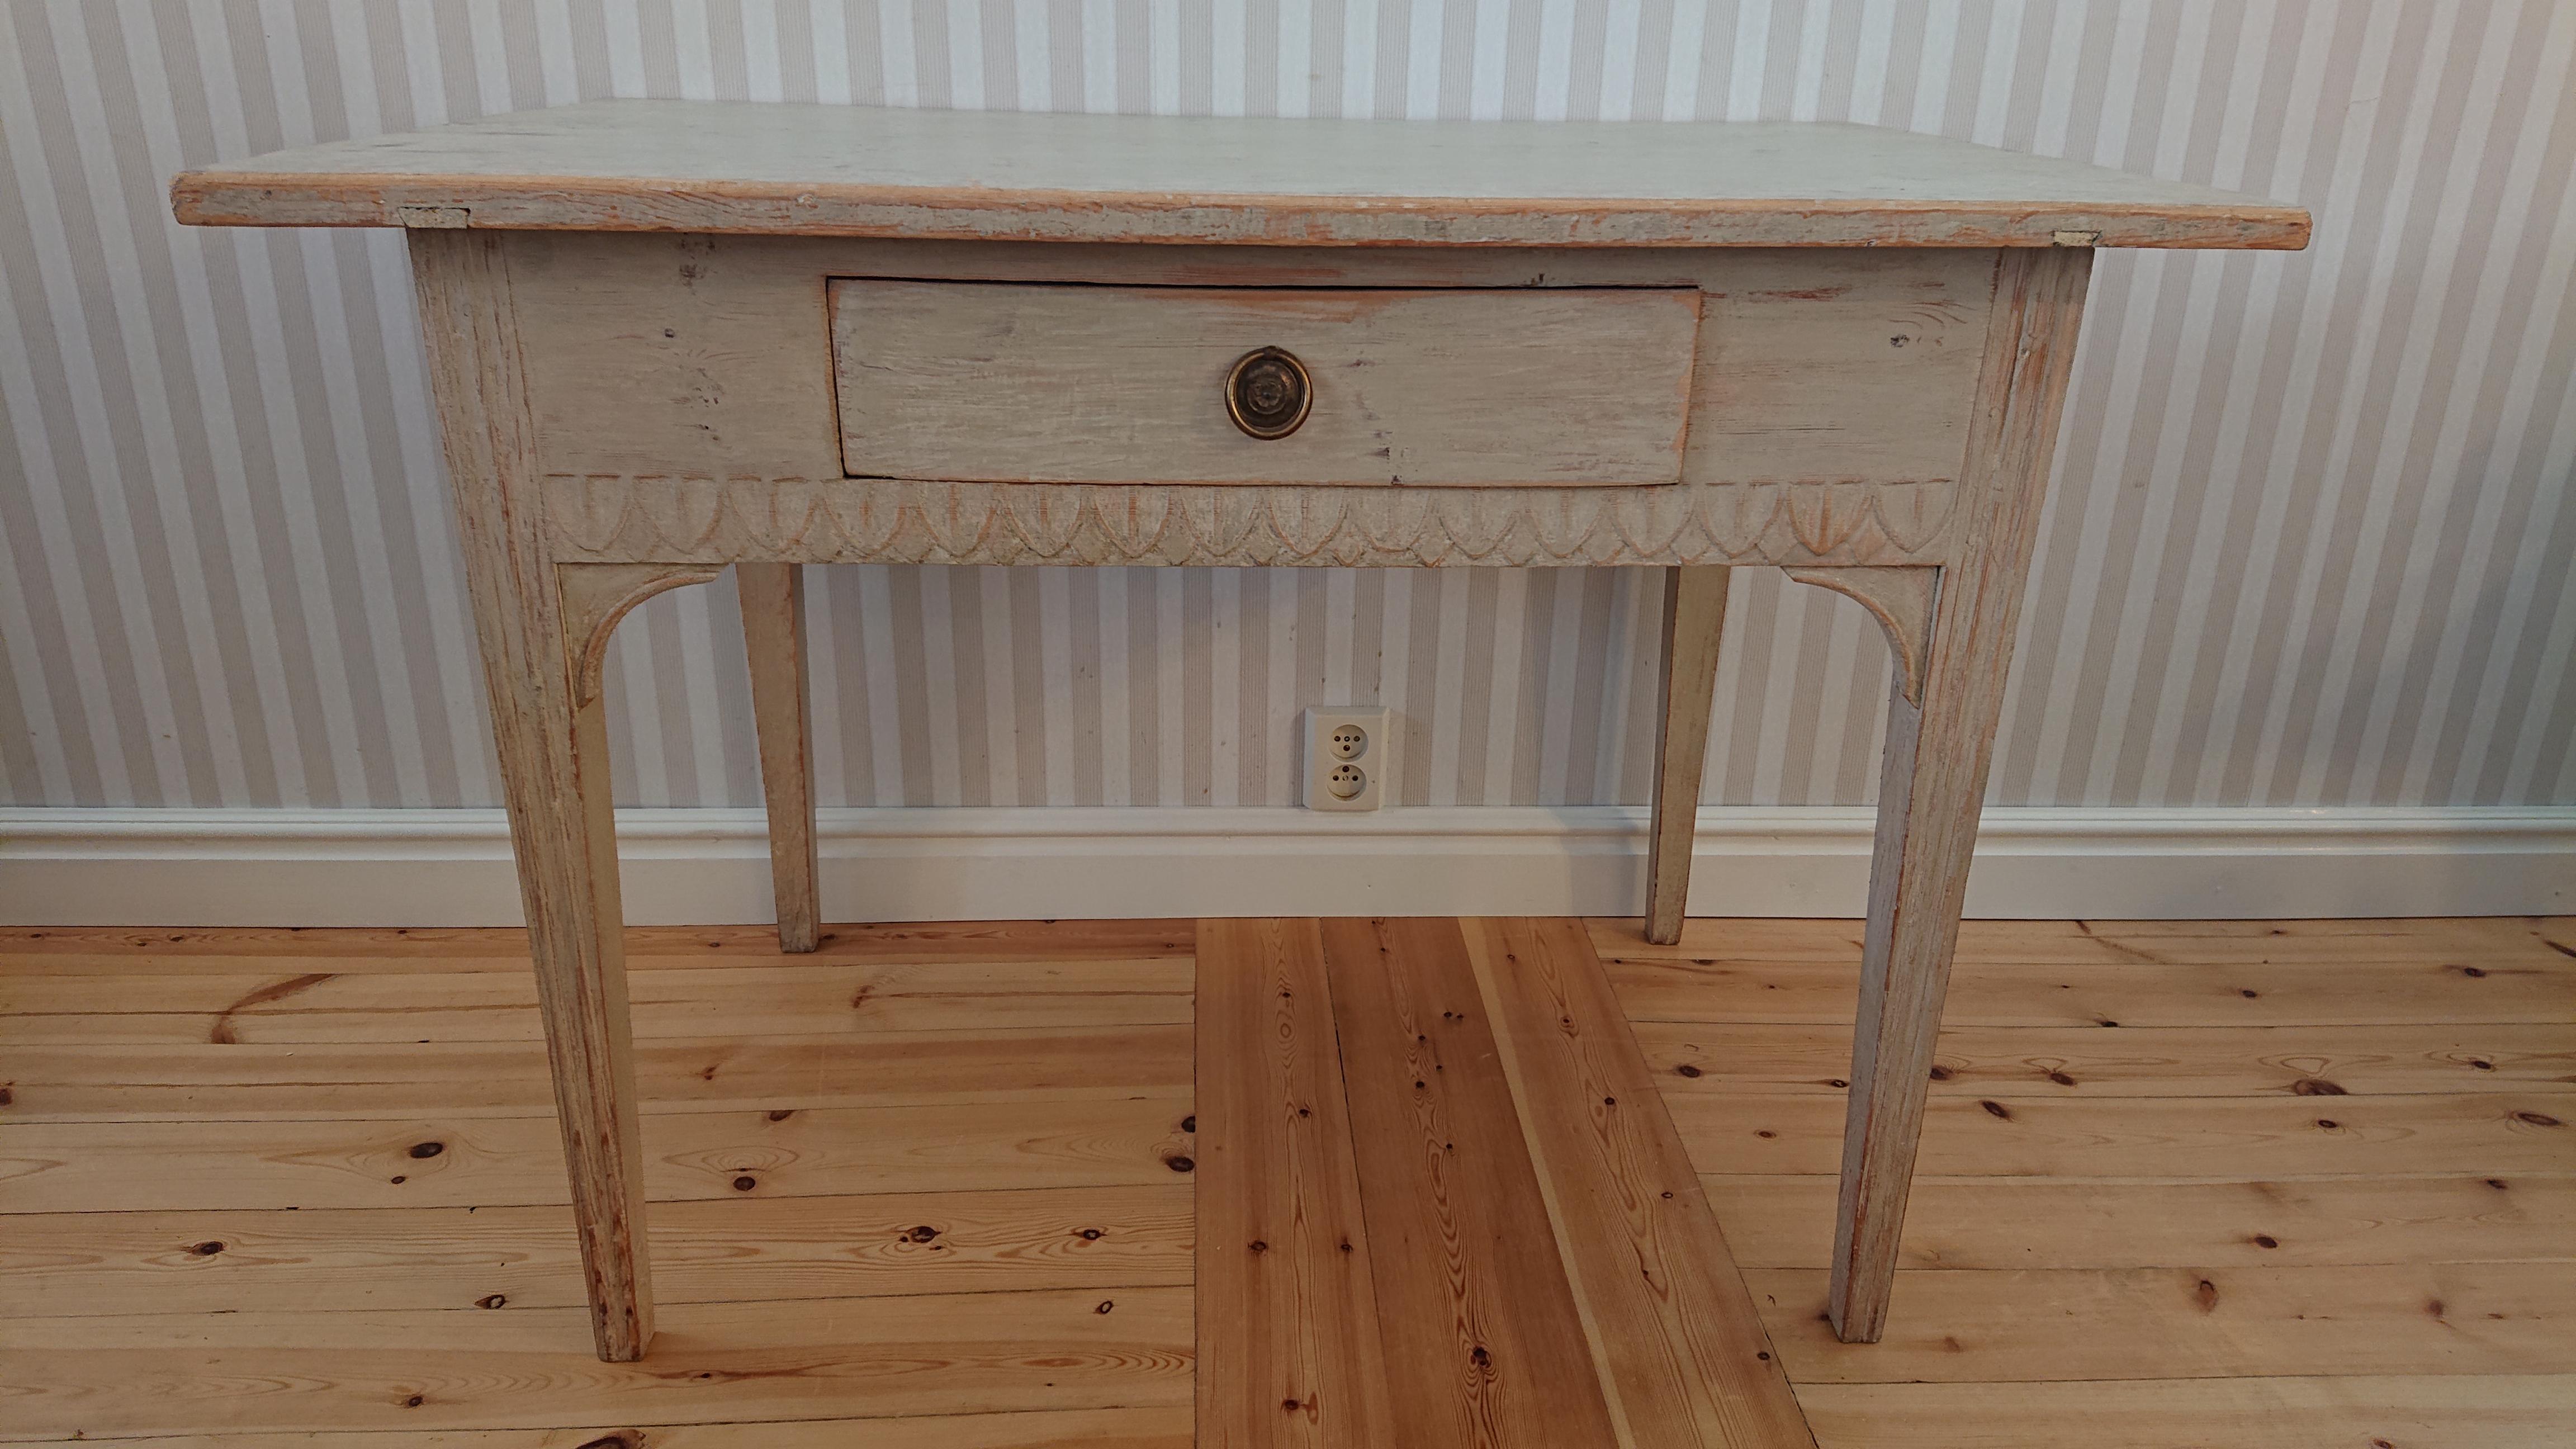 19th century Swedish gustavian desk from Umea Vasterbotten, Northern Sweden
Beautiful leaves around the table carved by hand, hence nice to have freestanding.
Drawer with original hardware.
Carefully scraped by hand to its original color.
Small